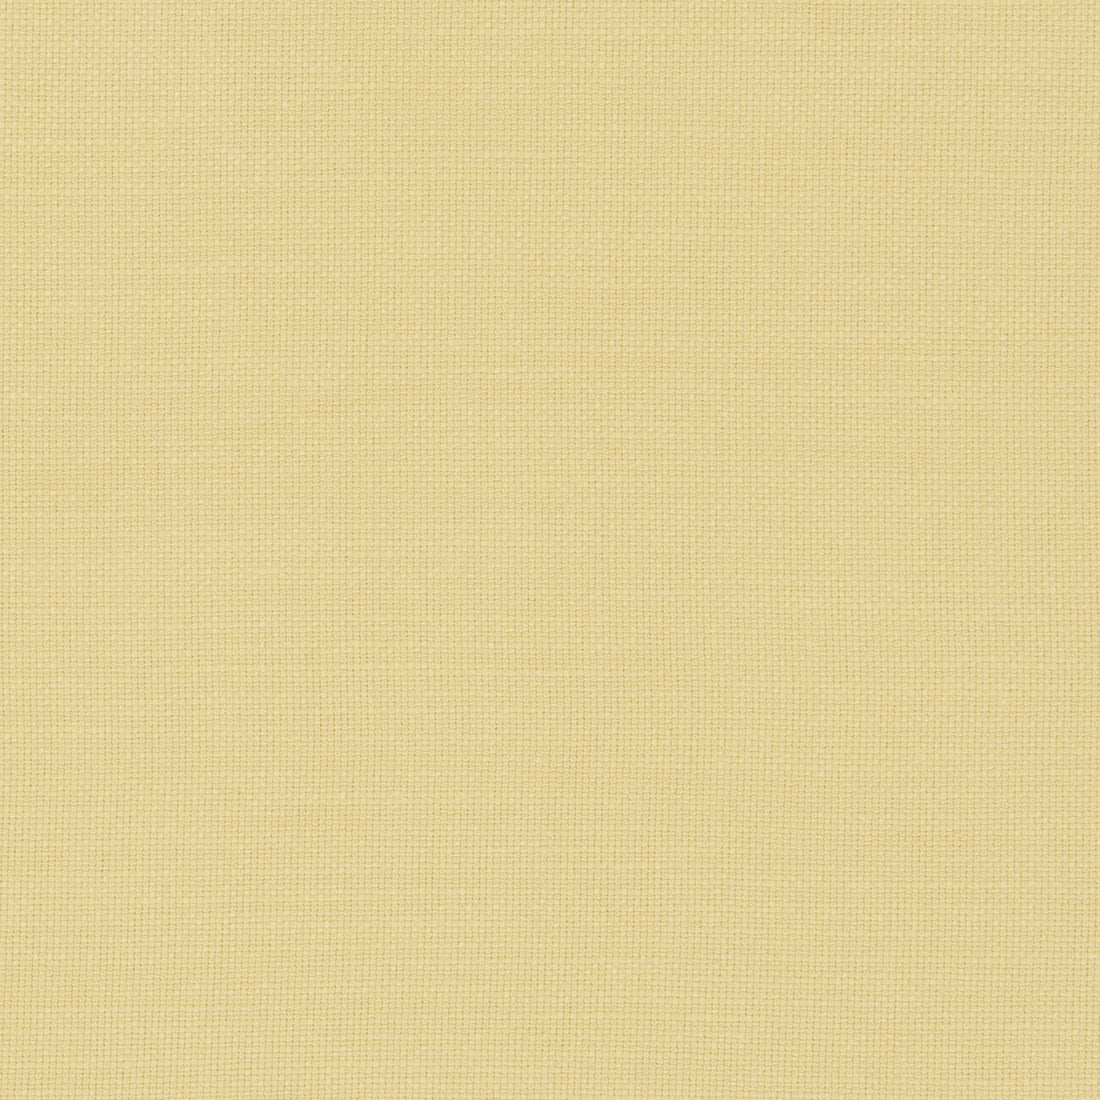 Nantucket fabric in corn color - pattern F0594/12.CAC.0 - by Clarke And Clarke in the Clarke &amp; Clarke Nantucket collection